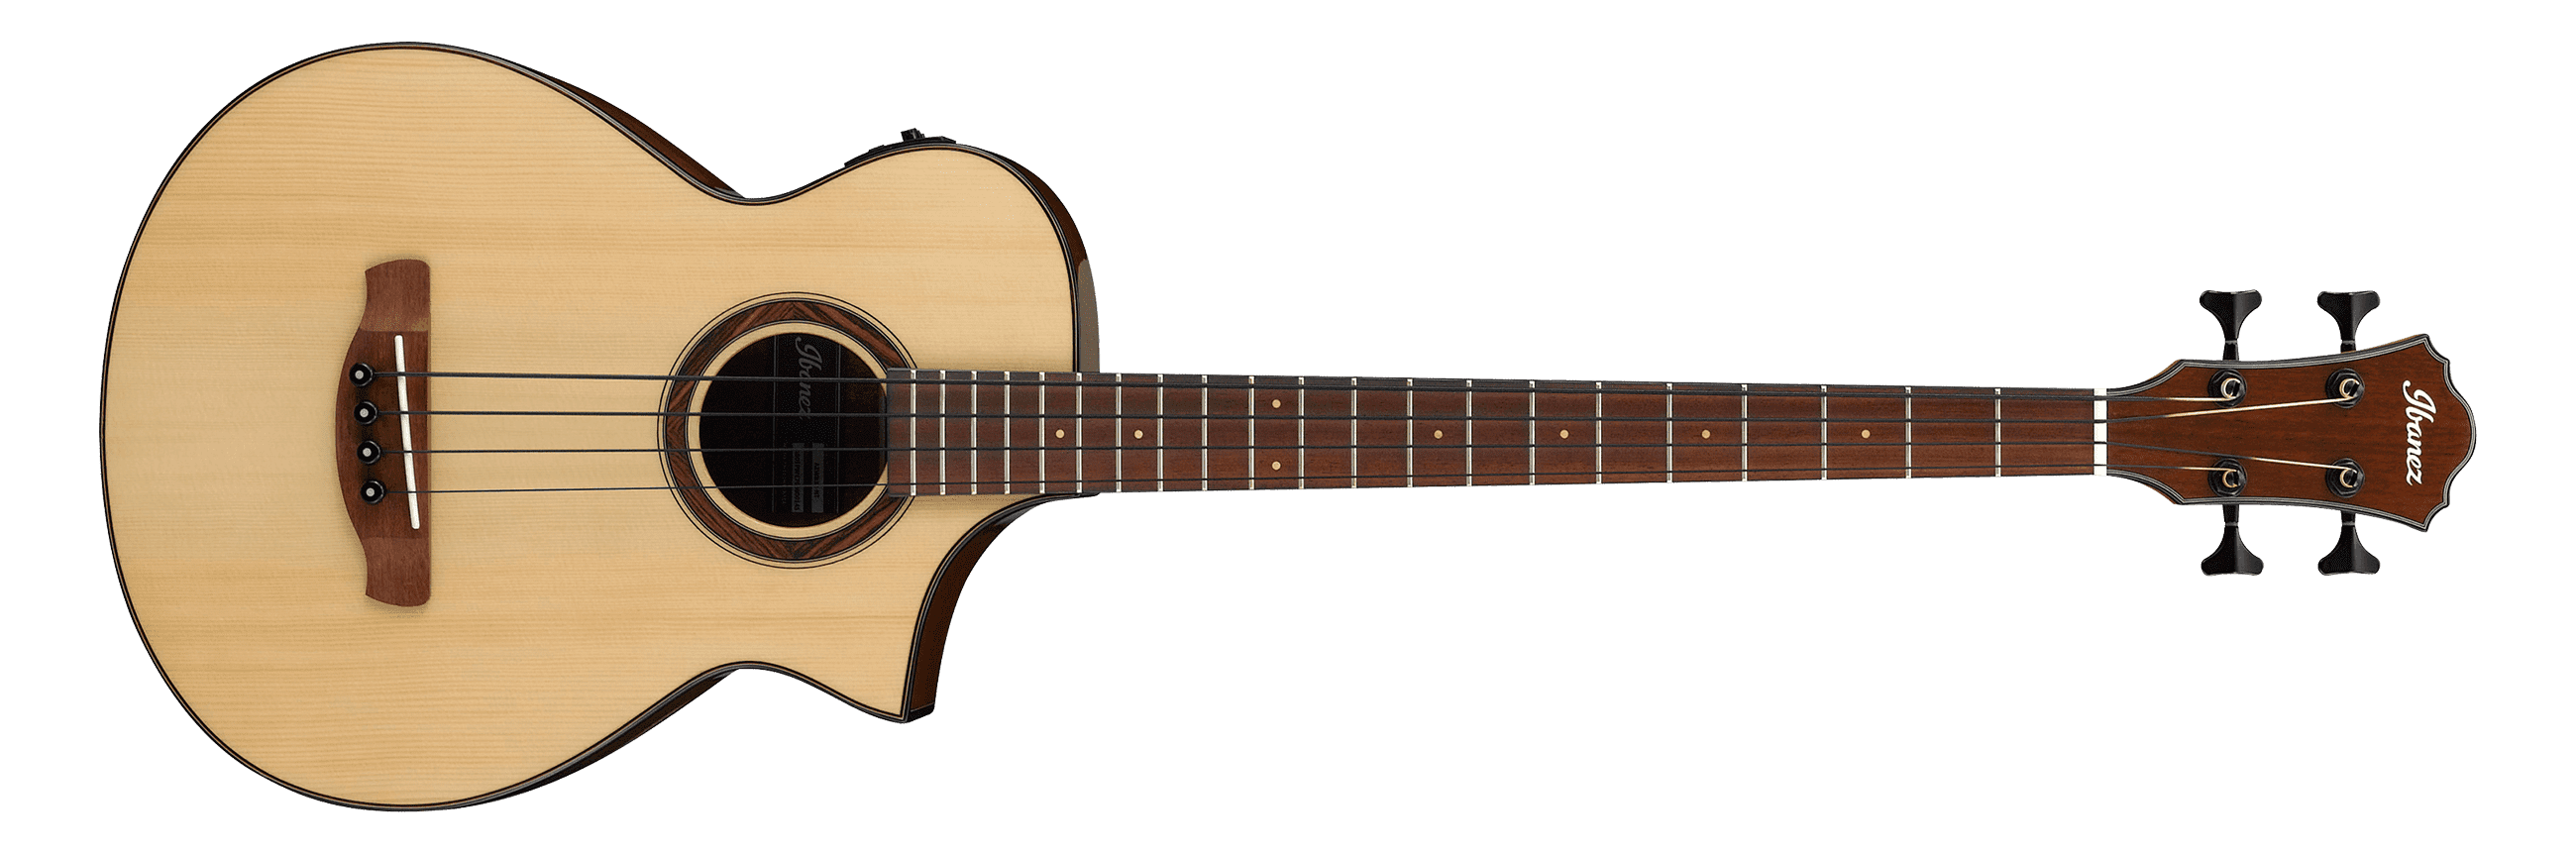 Ibanez AEWB32 Acoustic-Electric Bass Guitar 